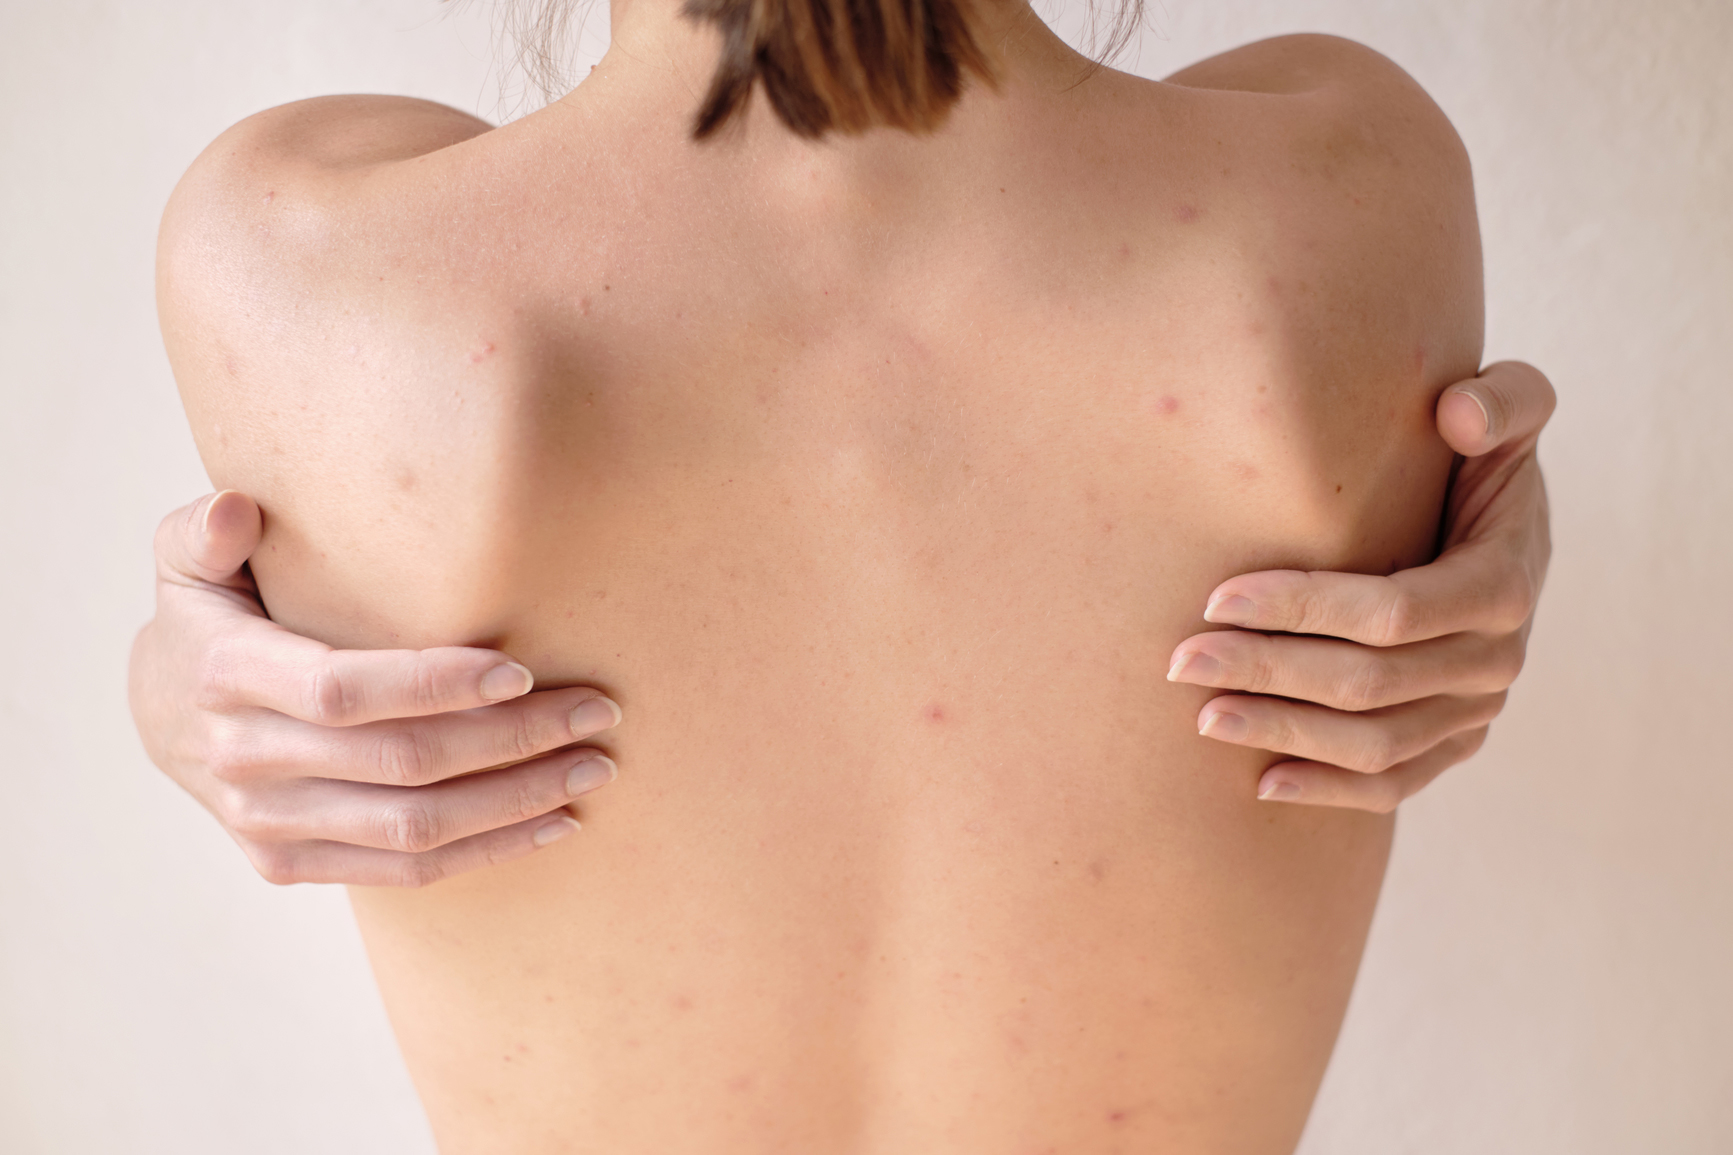 woman with body acne hugging herself